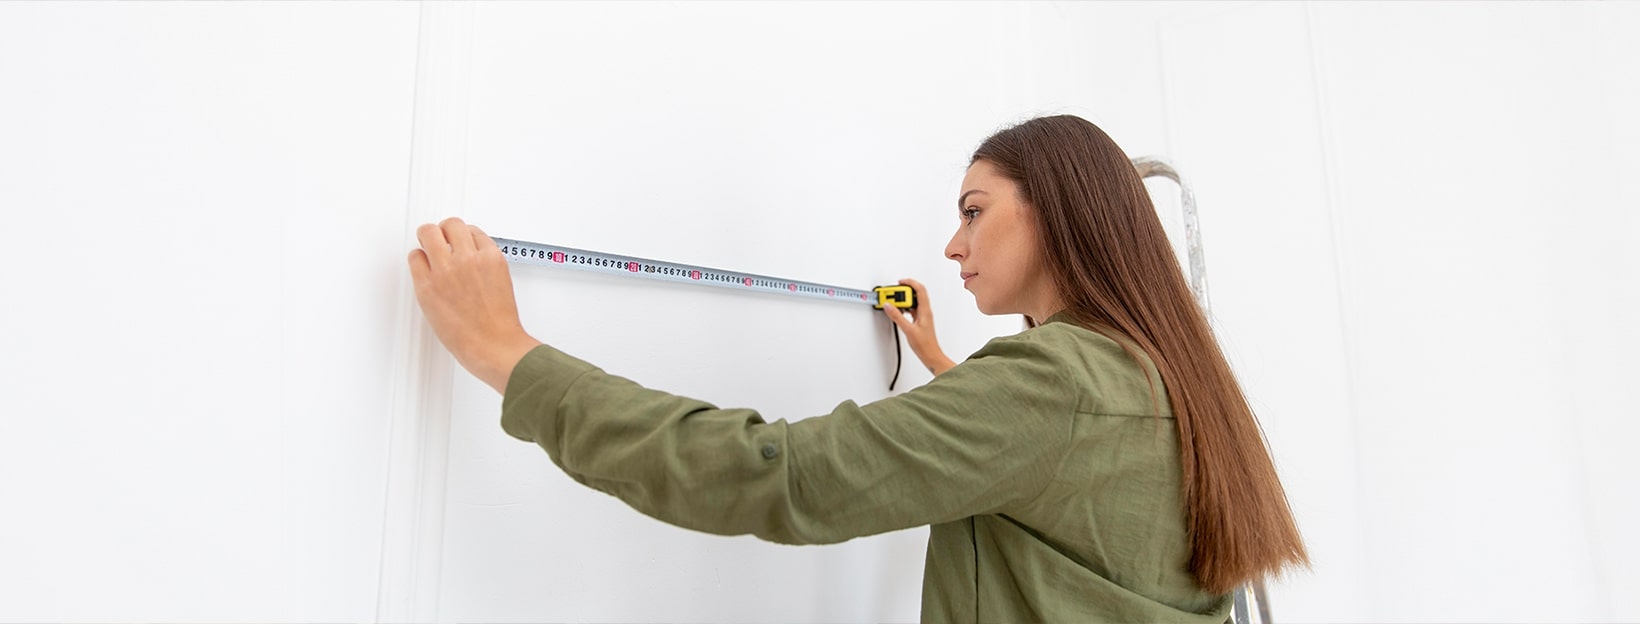 5 Steps & Tools to Measure Wall for Wallpaper Decor